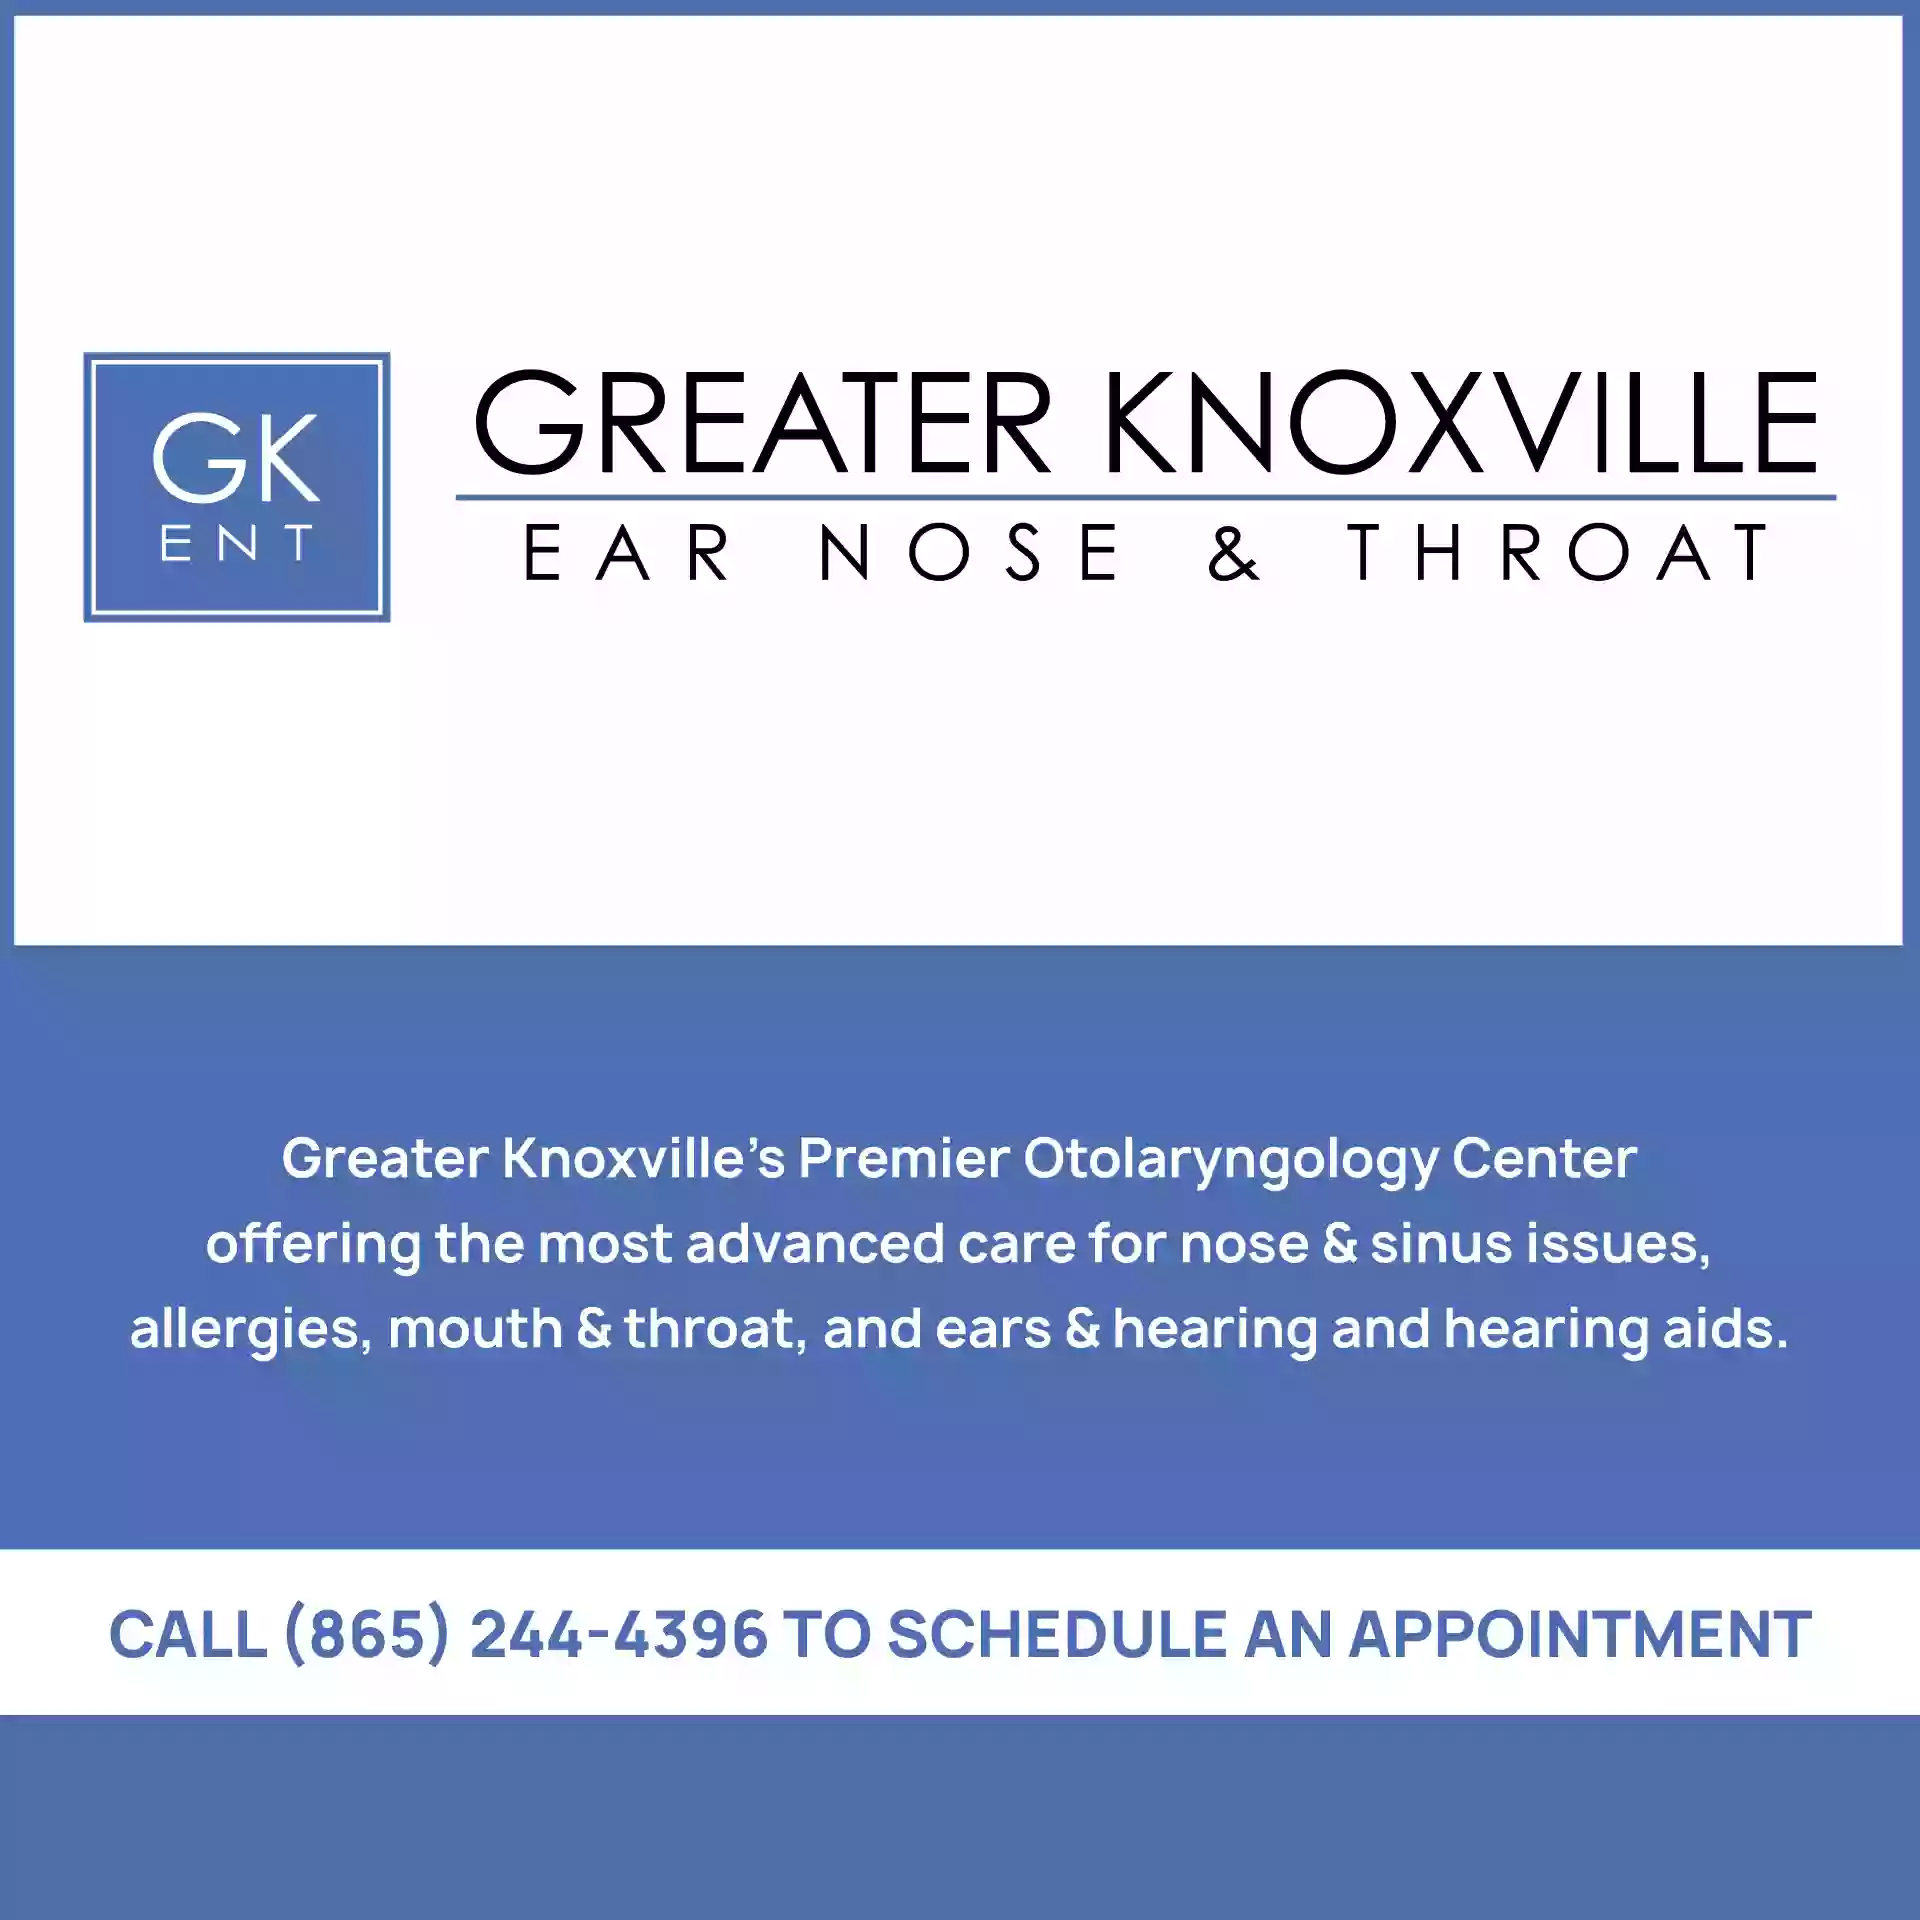 Greater Knoxville Ear Nose & Throat